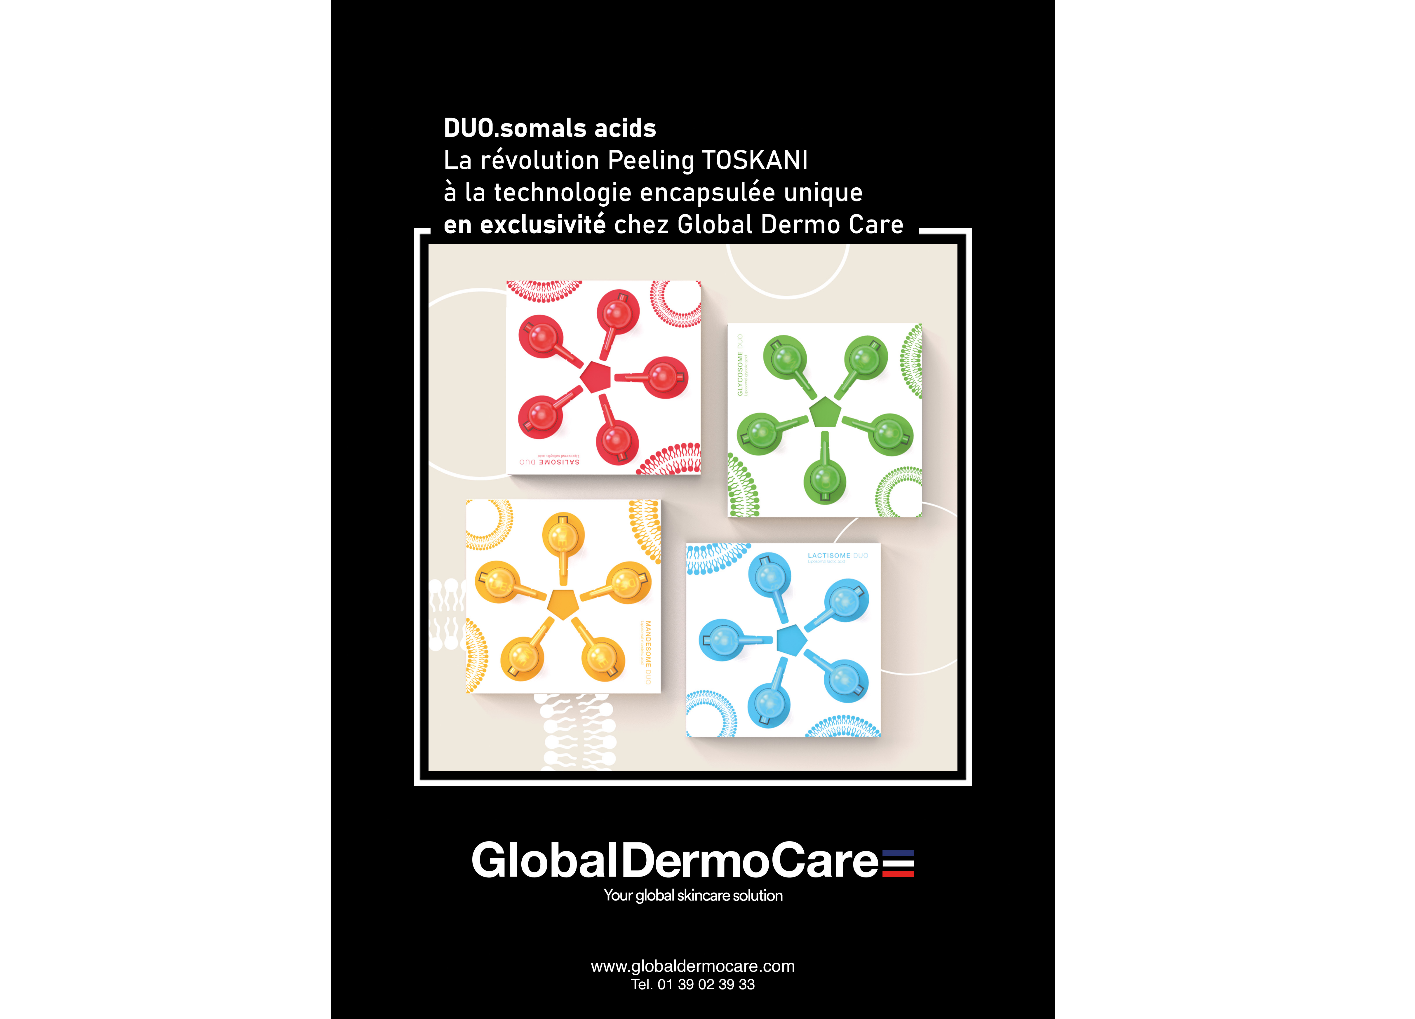 Global Dermo Care - Your global skincare solution